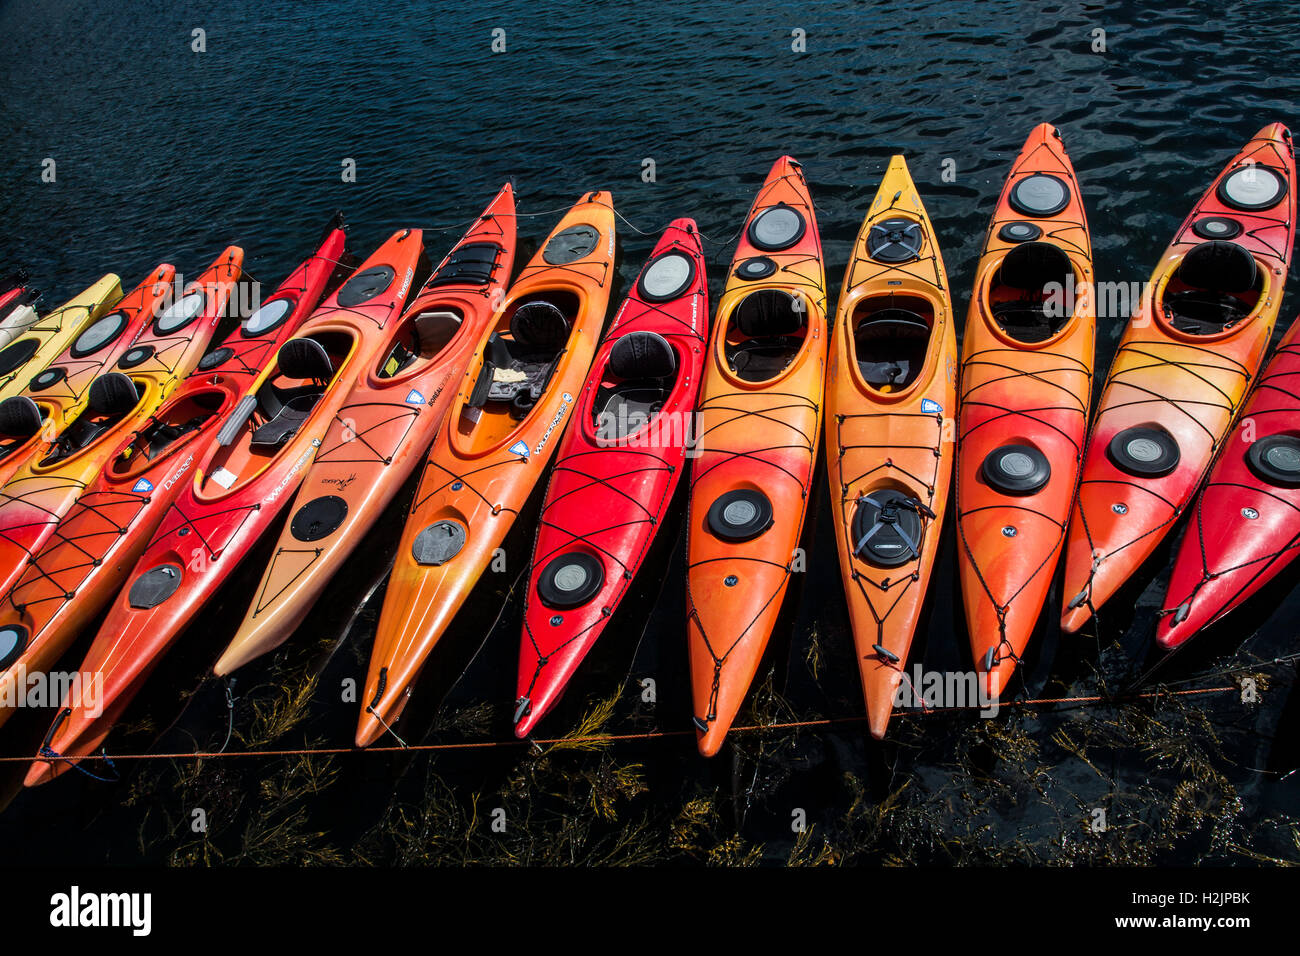 Close up colourful abstract pattern of a row of Kayaks, Rockport, Massachusetts, USA, New England, America, file sz 11.05mb compressed, 300dpi Stock Photo